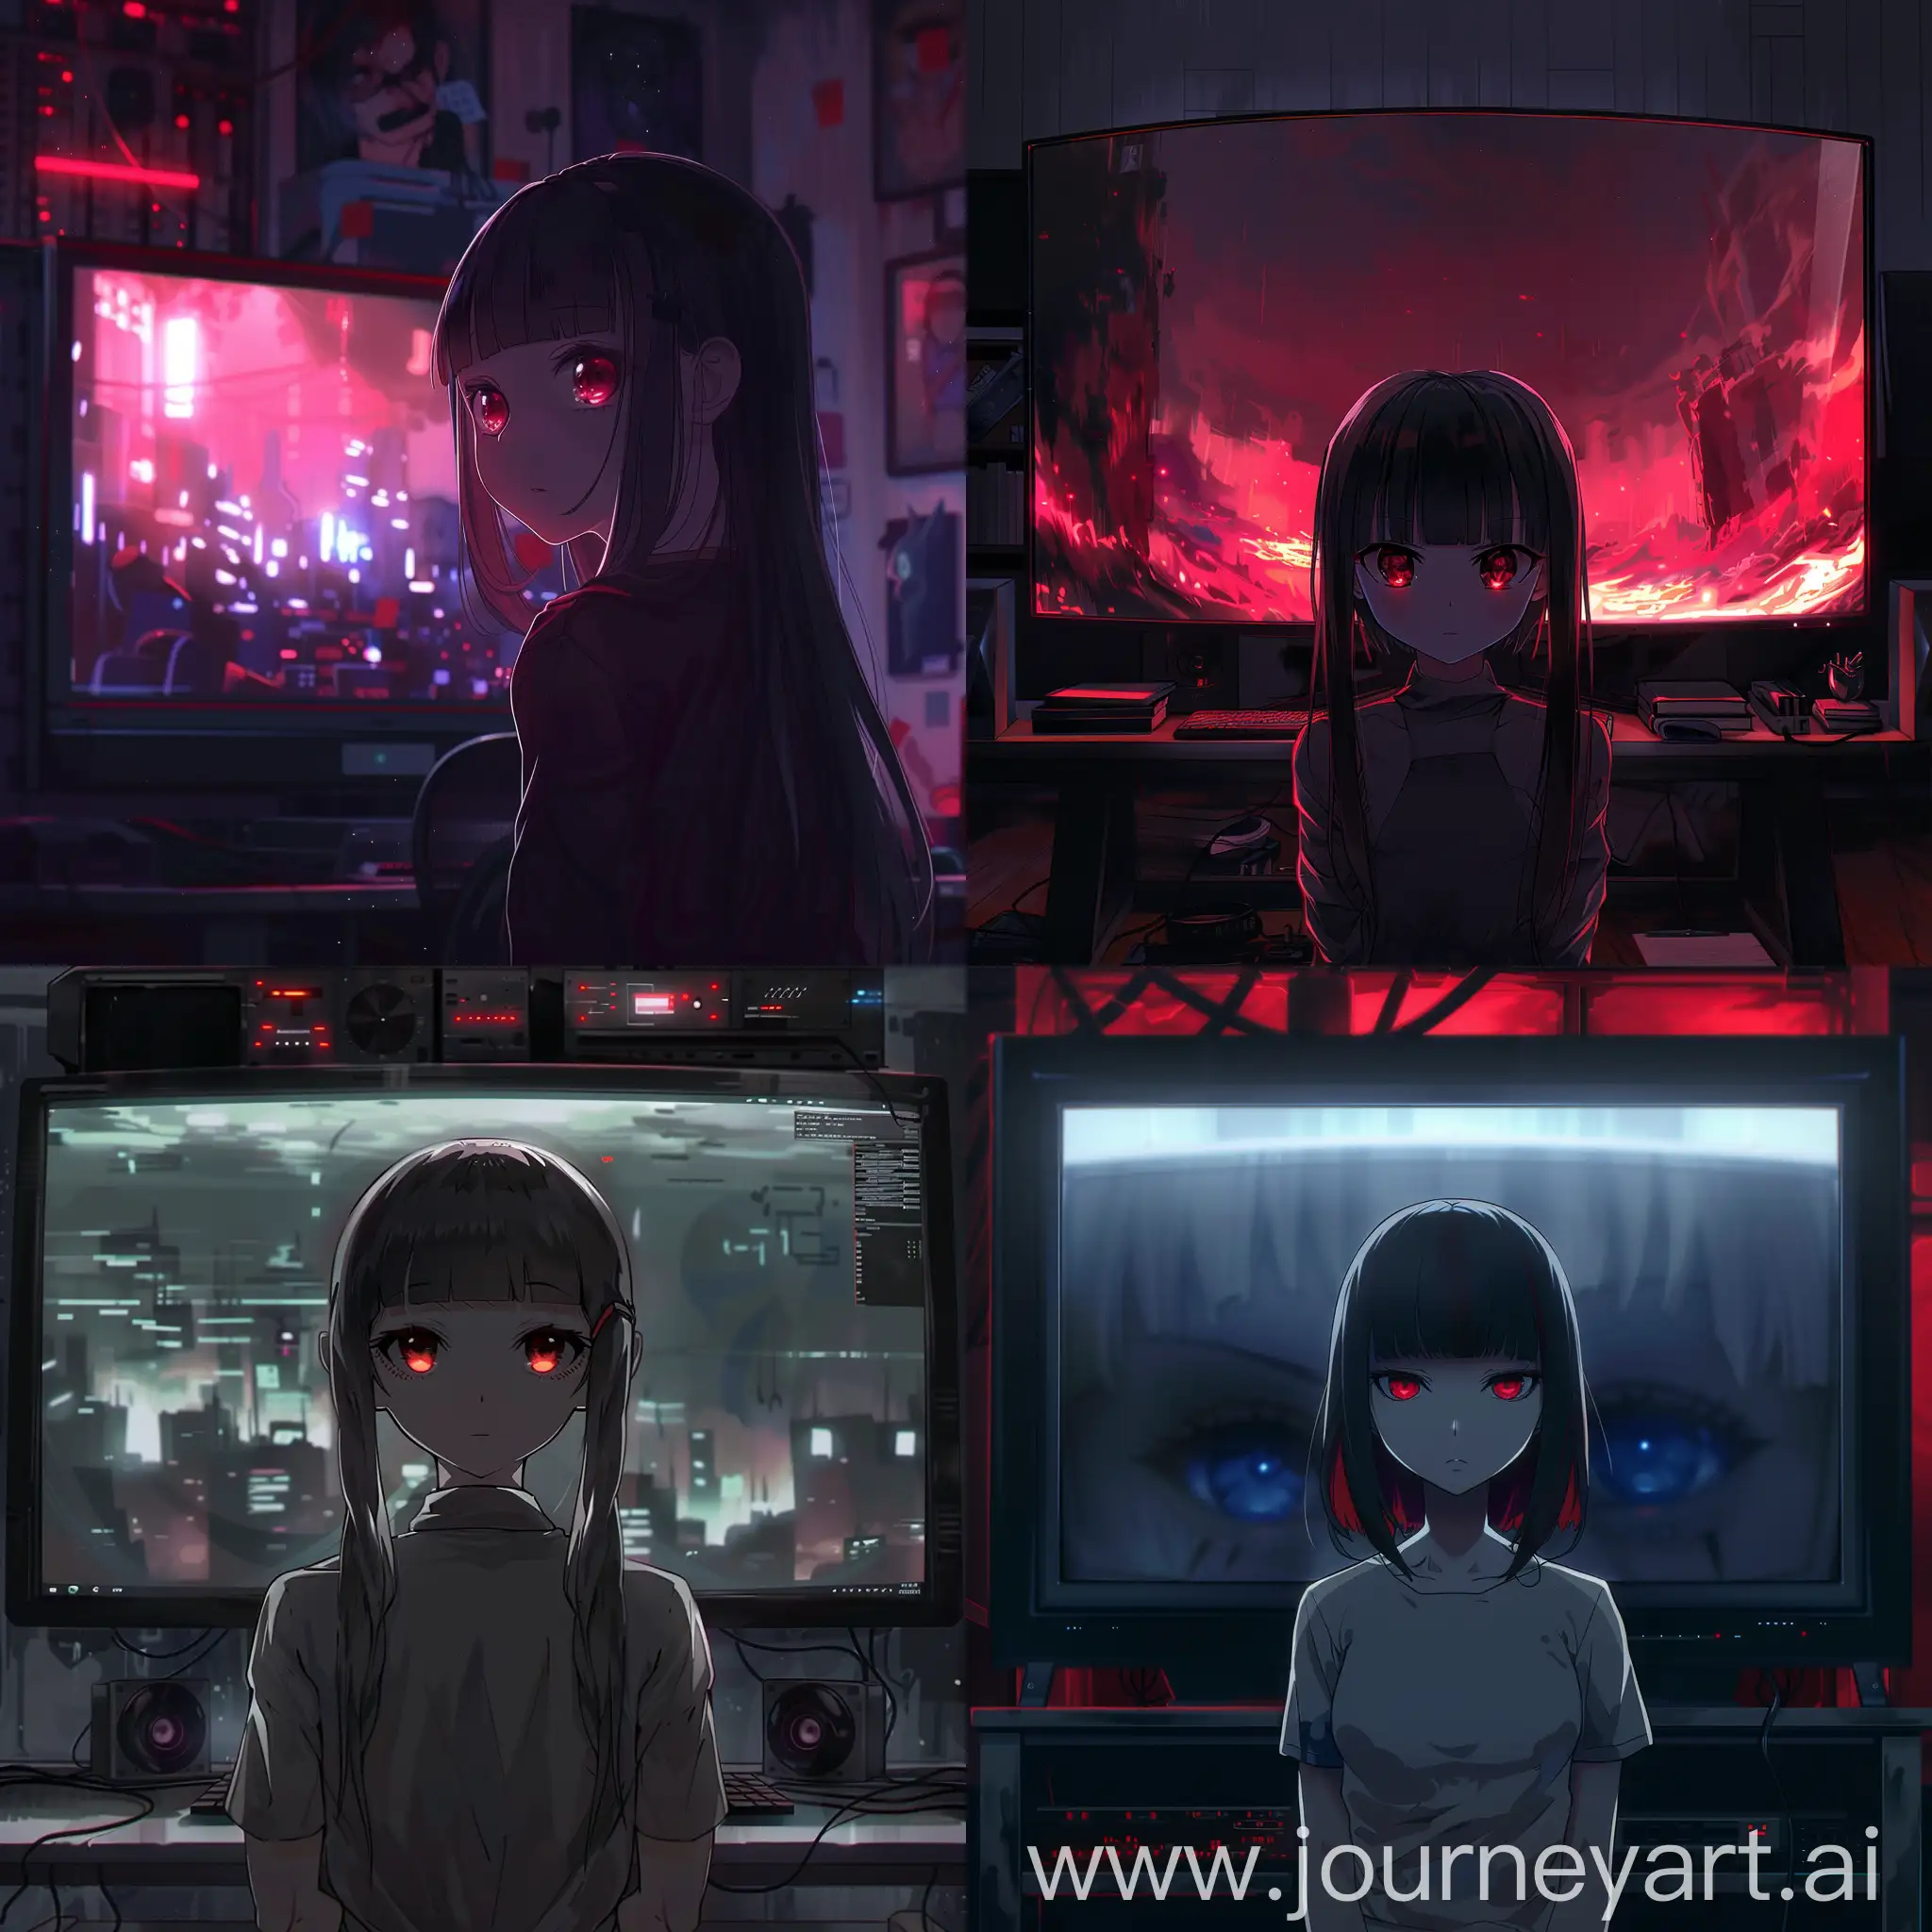 Anime girl, red eyes, in front of big monitor